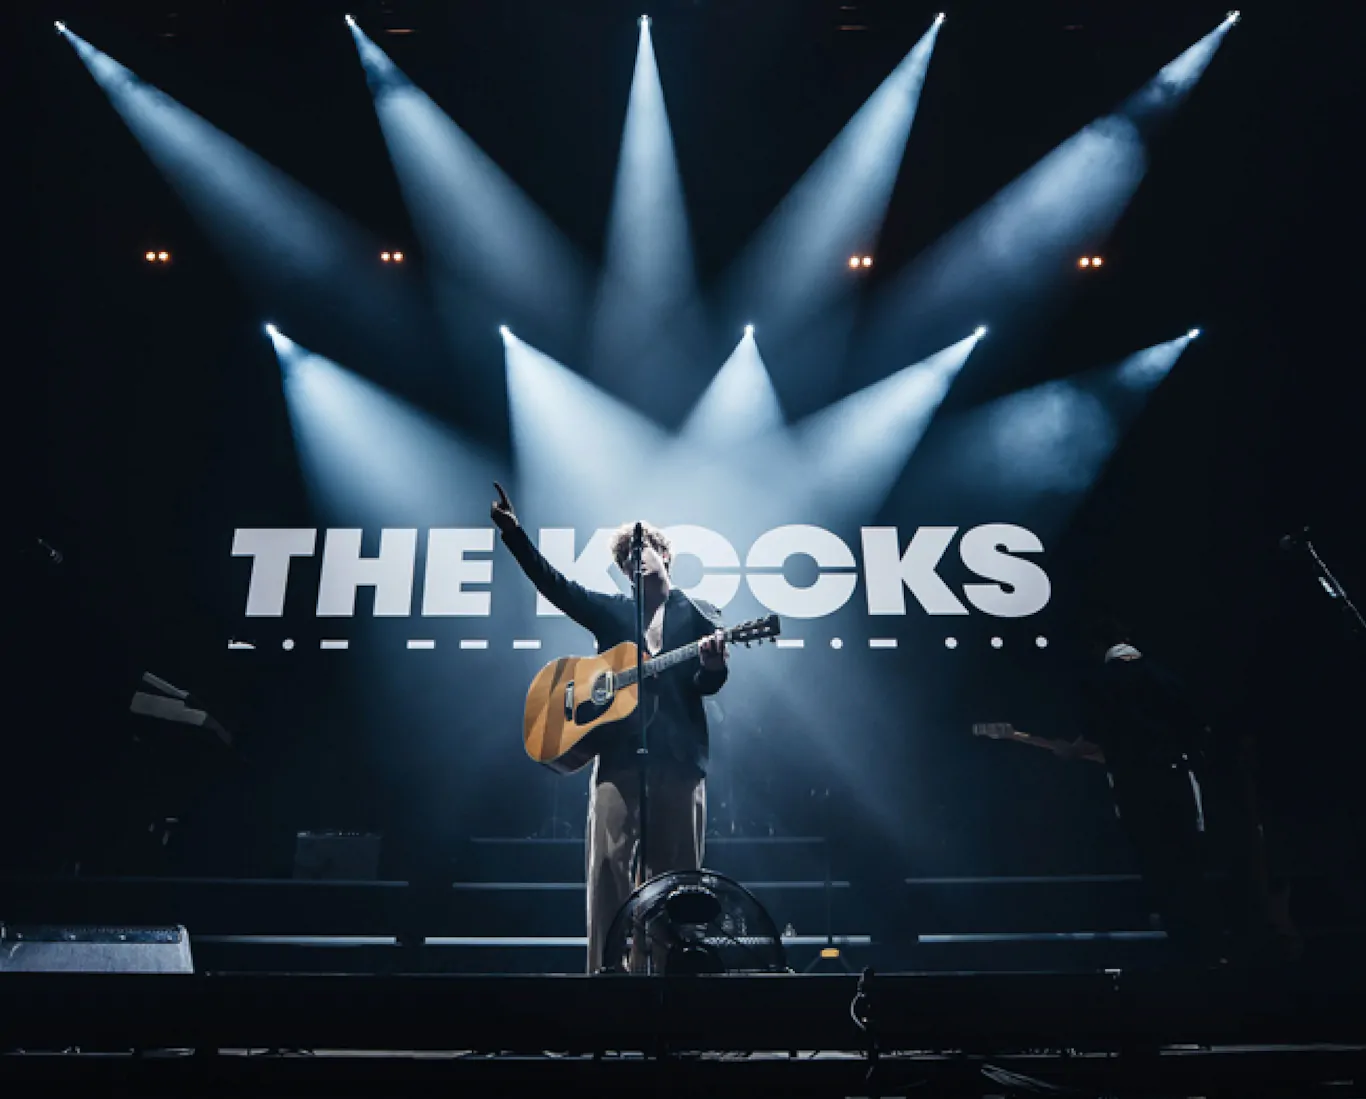 THE KOOKS announce a headline summer show at Fairview Park on 28th June 2023